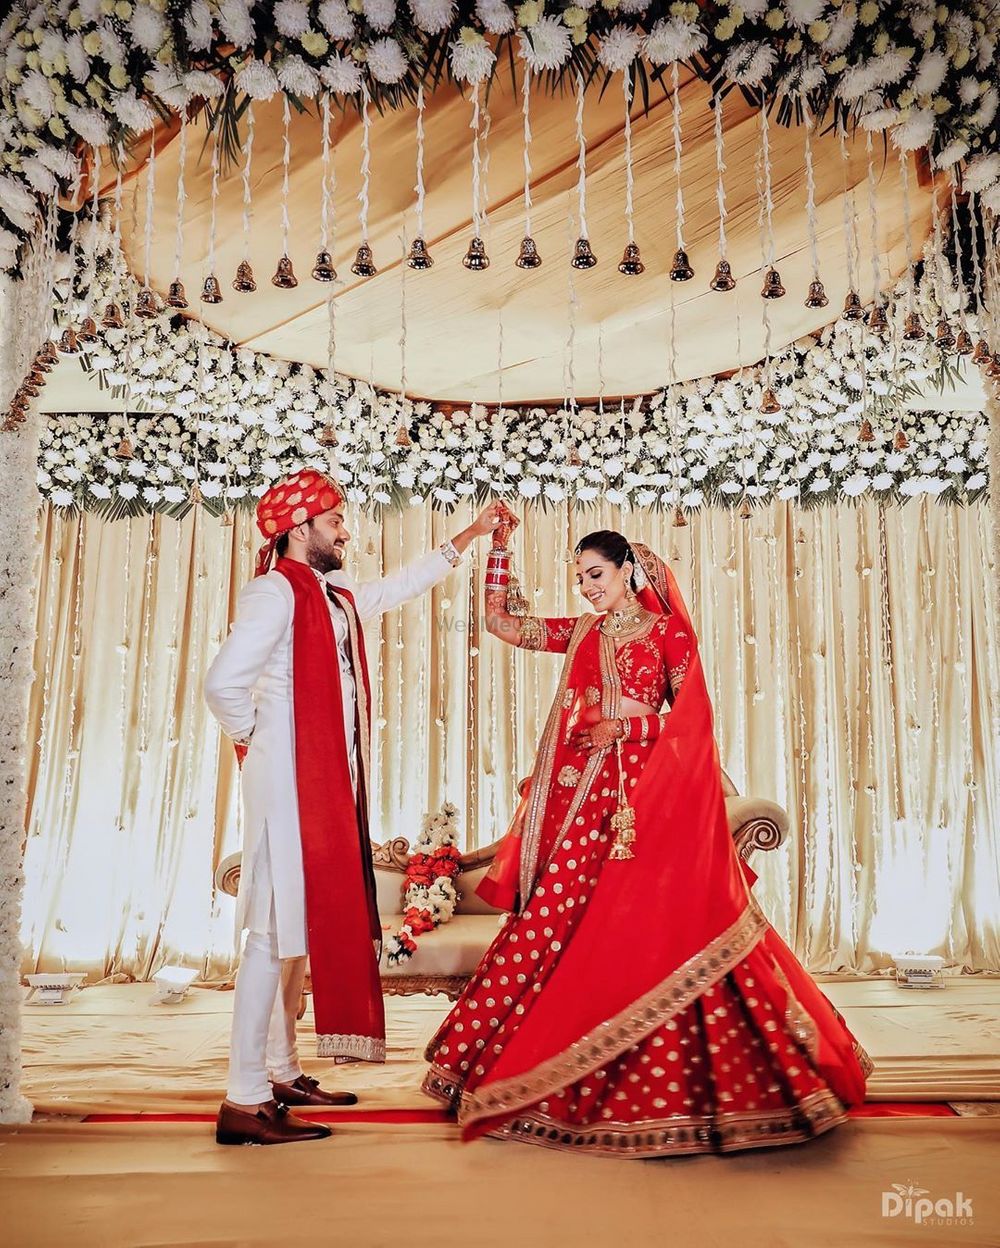 Photo of The bride is stunning red lehenga dancing with the groom